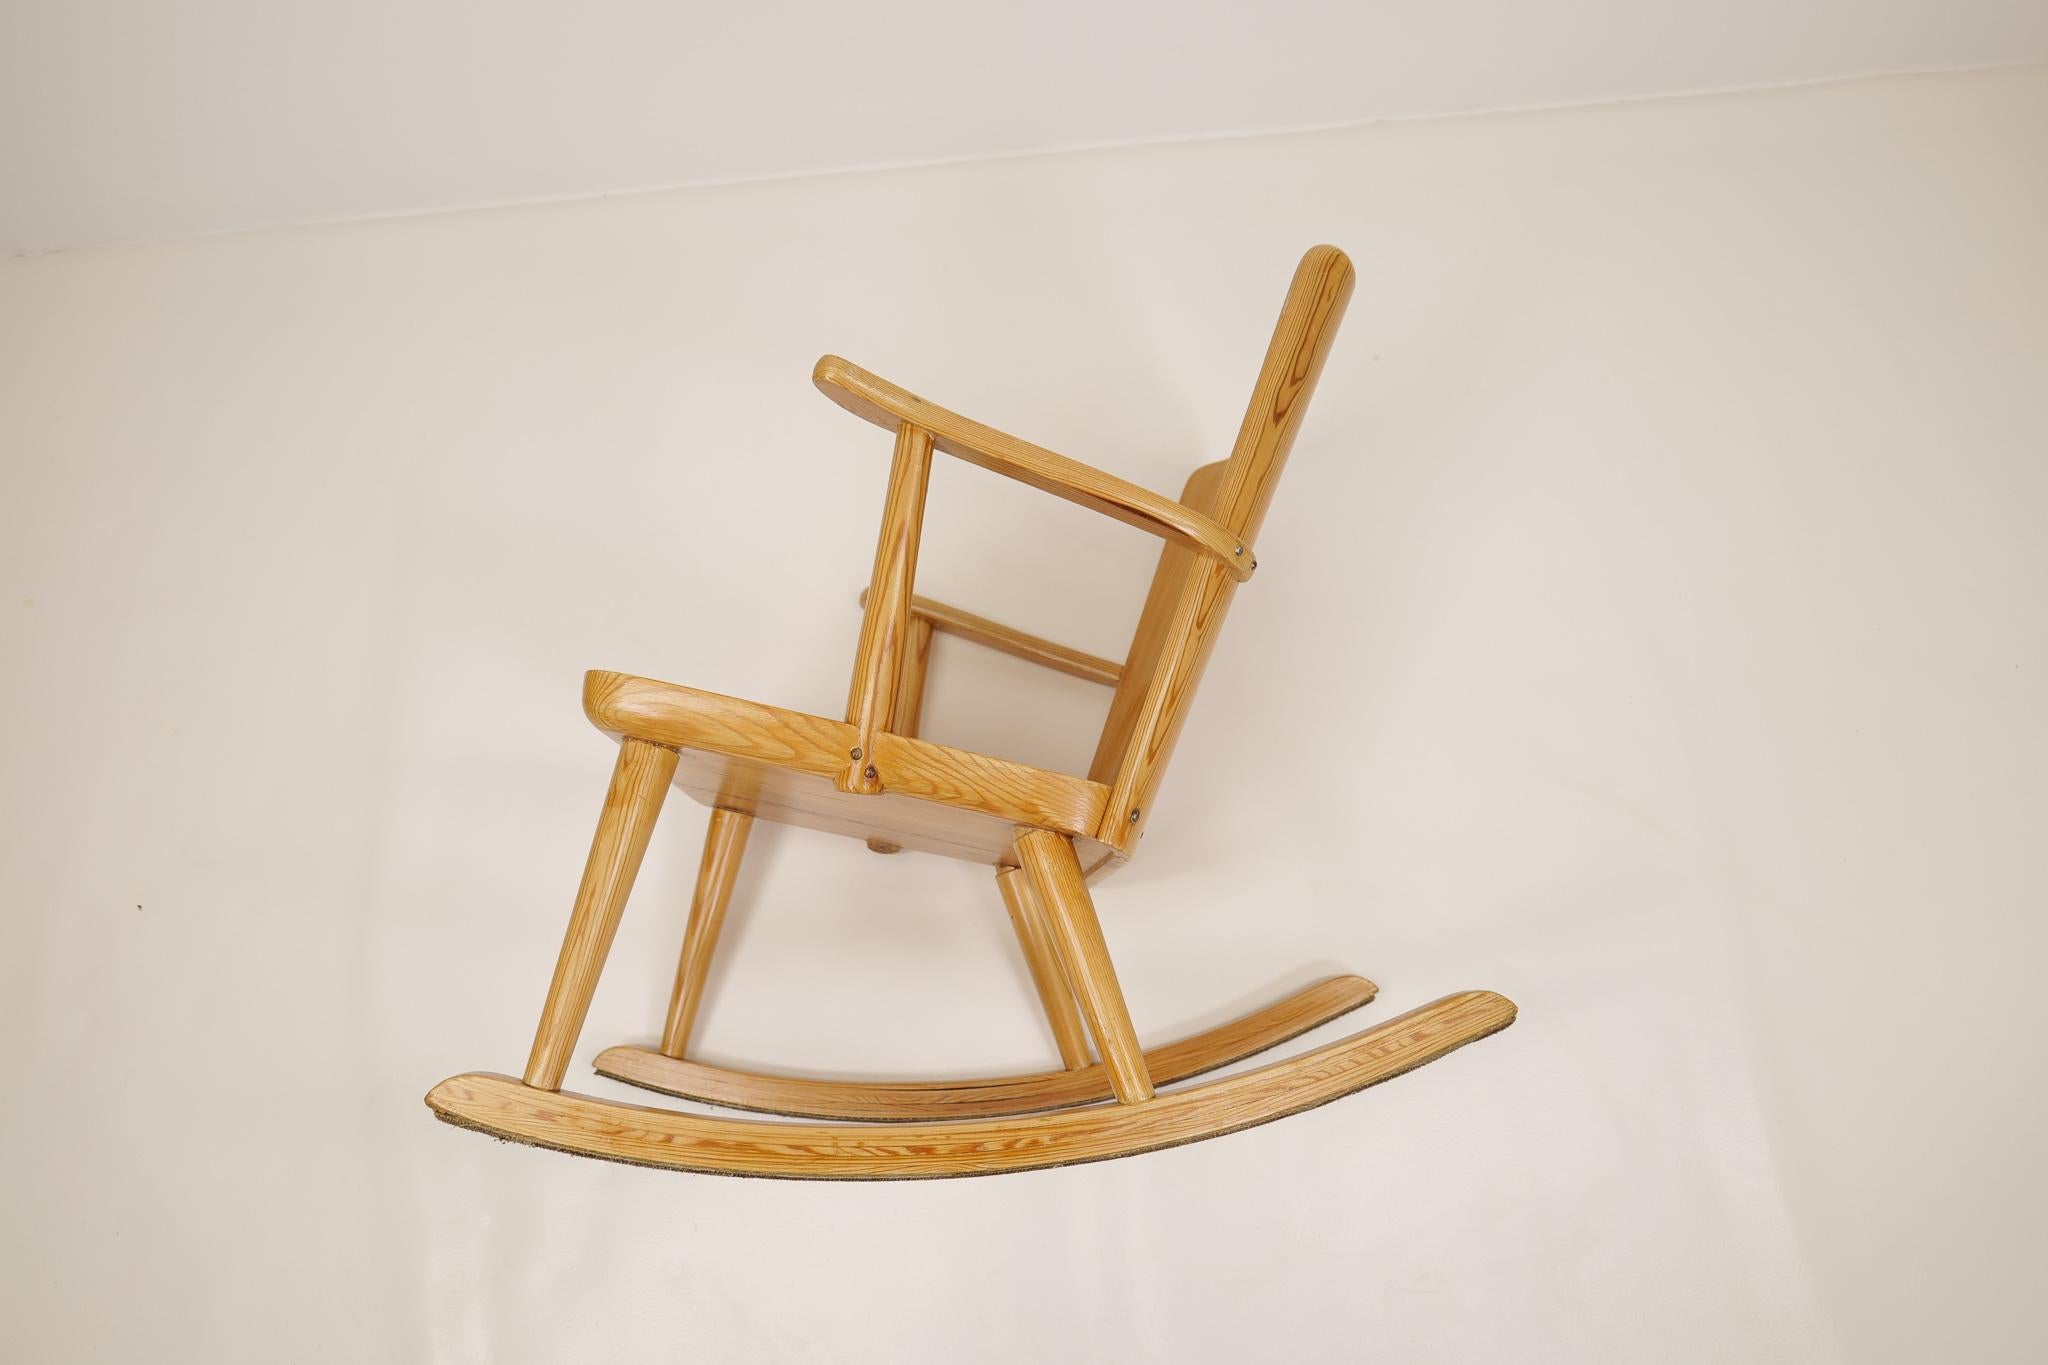 Midcentury Rocking Chair in Pine, Göran Malmvall, Sweden, 1940s For Sale 8